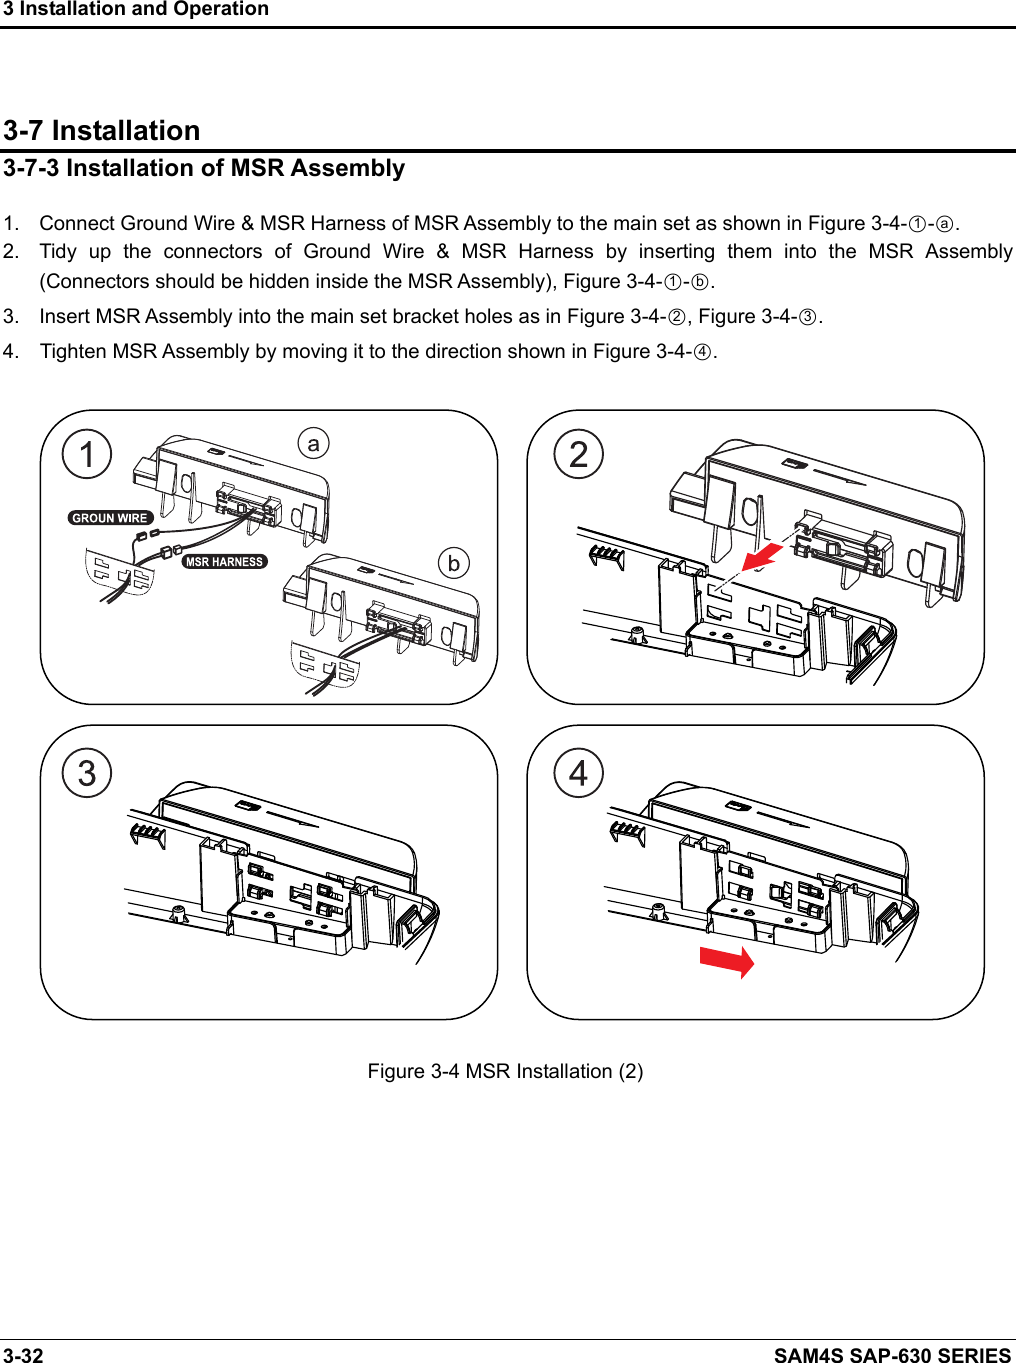 3 Installation and Operation 3-32    SAM4S SAP-630 SERIES  3-7 Installation 3-7-3 Installation of MSR Assembly  1.  Connect Ground Wire &amp; MSR Harness of MSR Assembly to the main set as shown in Figure 3-4-○1-○a. 2.  Tidy  up  the  connectors  of  Ground  Wire  &amp;  MSR  Harness  by  inserting  them  into  the  MSR  Assembly (Connectors should be hidden inside the MSR Assembly), Figure 3-4-○1-○b. 3.  Insert MSR Assembly into the main set bracket holes as in Figure 3-4-○2, Figure 3-4-○3. 4.    Tighten MSR Assembly by moving it to the direction shown in Figure 3-4-○4.                               Figure 3-4 MSR Installation (2)            